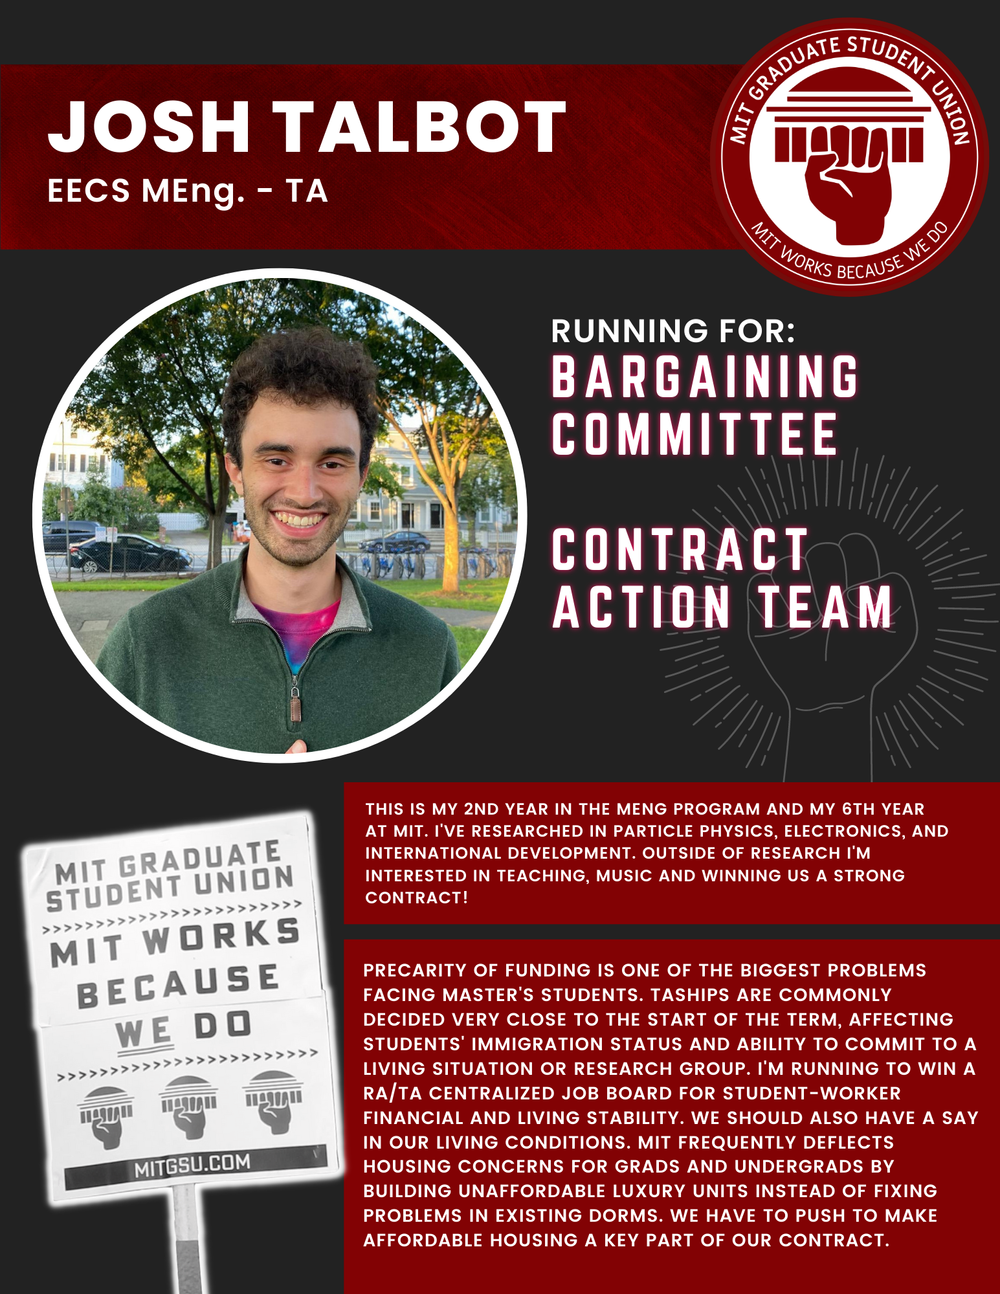  JOSH TALBOT EECS MEng. - TA   RUNNING FOR: Bargaining Committee  Contract Action Team  THIS IS MY 2ND YEAR IN THE MENG PROGRAM AND MY 6TH YEAR AT MIT. I'VE RESEARCHED IN PARTICLE PHYSICS, ELECTRONICS, AND INTERNATIONAL DEVELOPMENT. OUTSIDE OF RESEAR